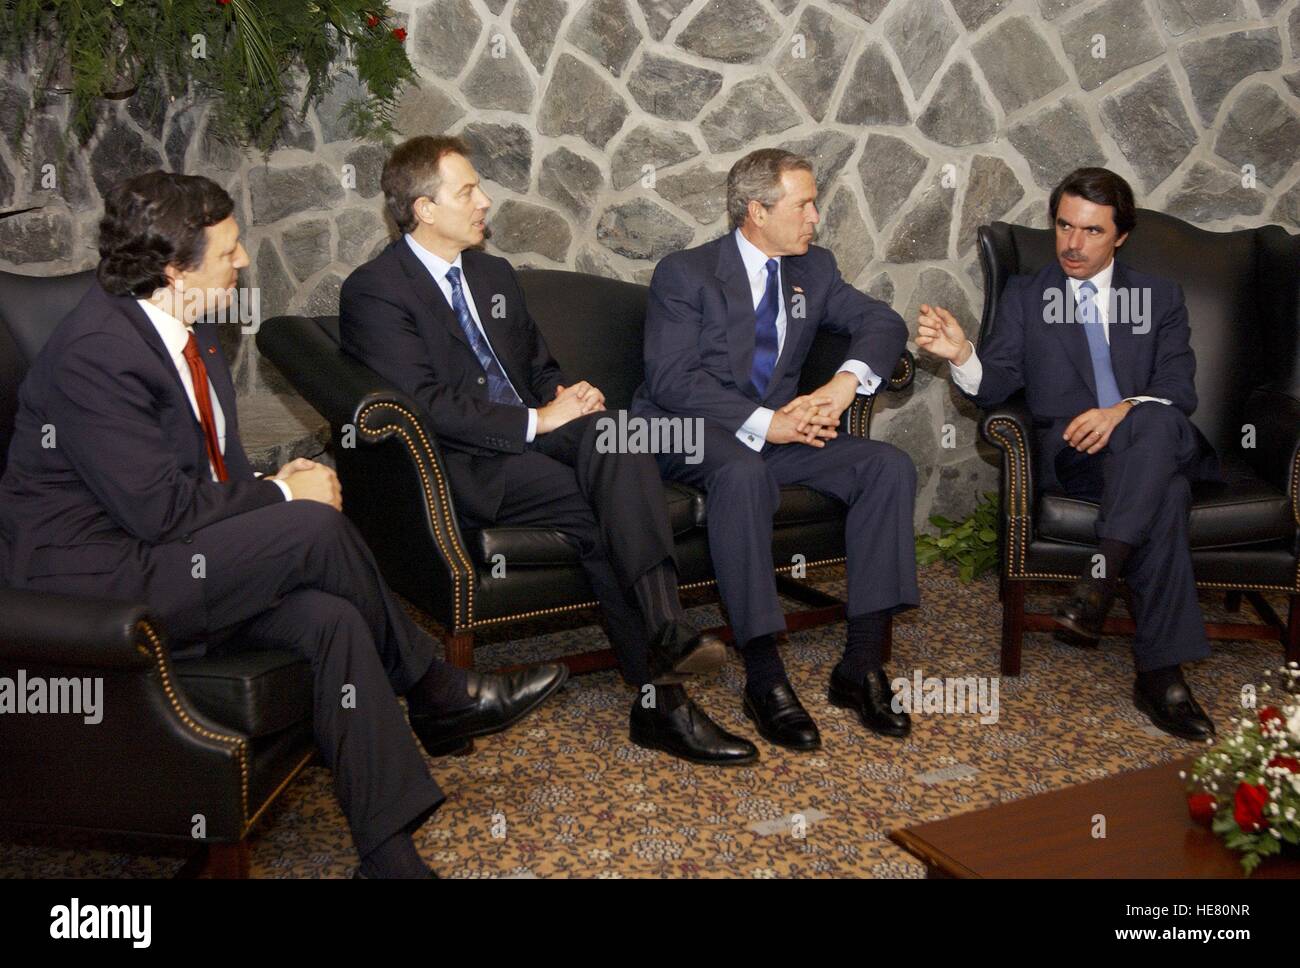 Portuguese Prime Minister Jose Manuel Durao Barroso, British Prime Minister Tony Blair, U.S. President George W. Bush, and Spanish Prime Minister Jose Maria Aznar discuss a possible war in Iraq during an emergency summit March 16, 2003 in the Azores in Portugal. Stock Photo